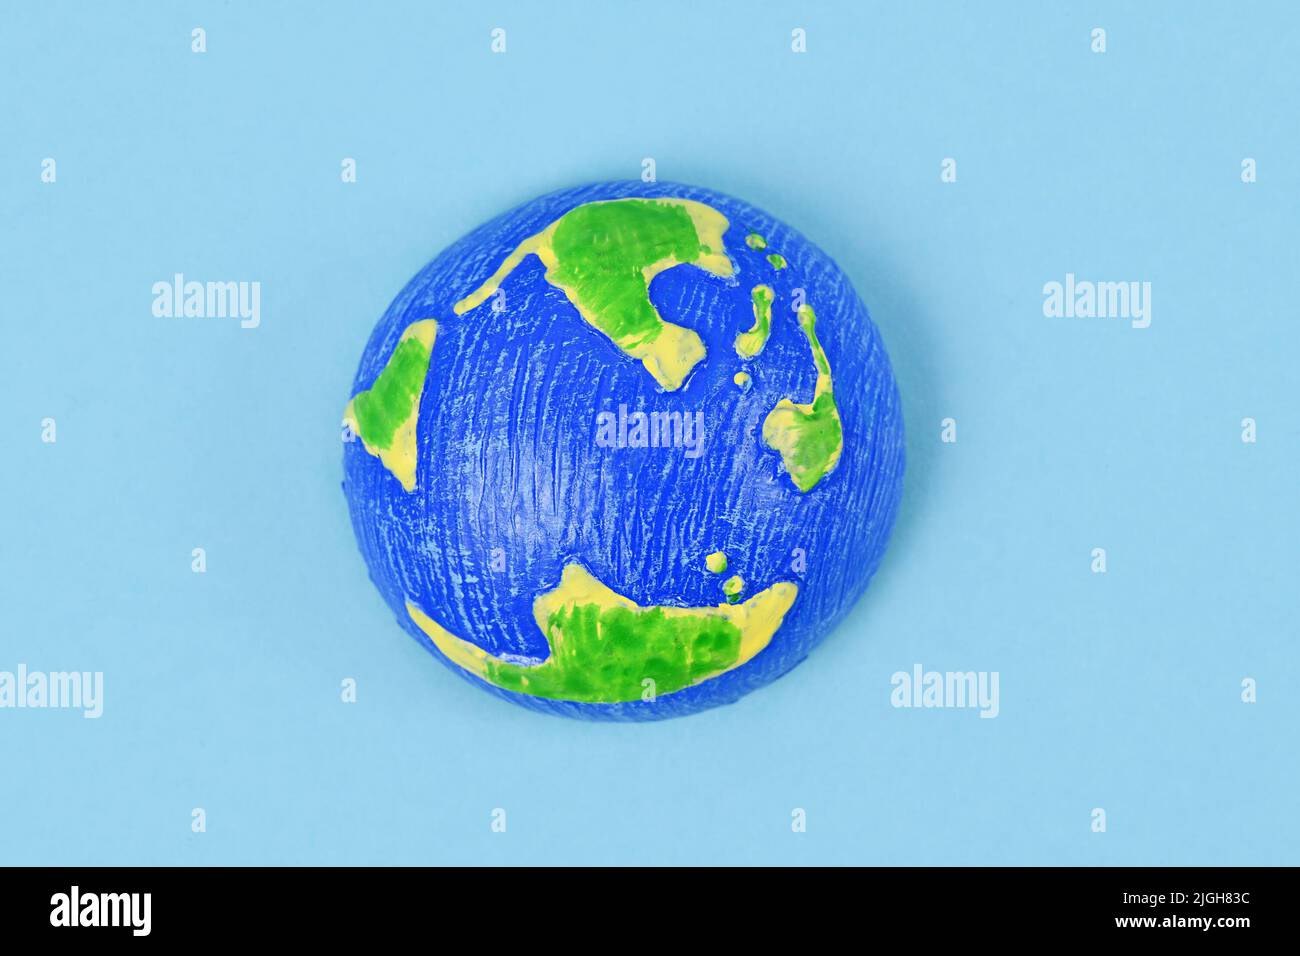 Small planet earth model on blue background Stock Photo